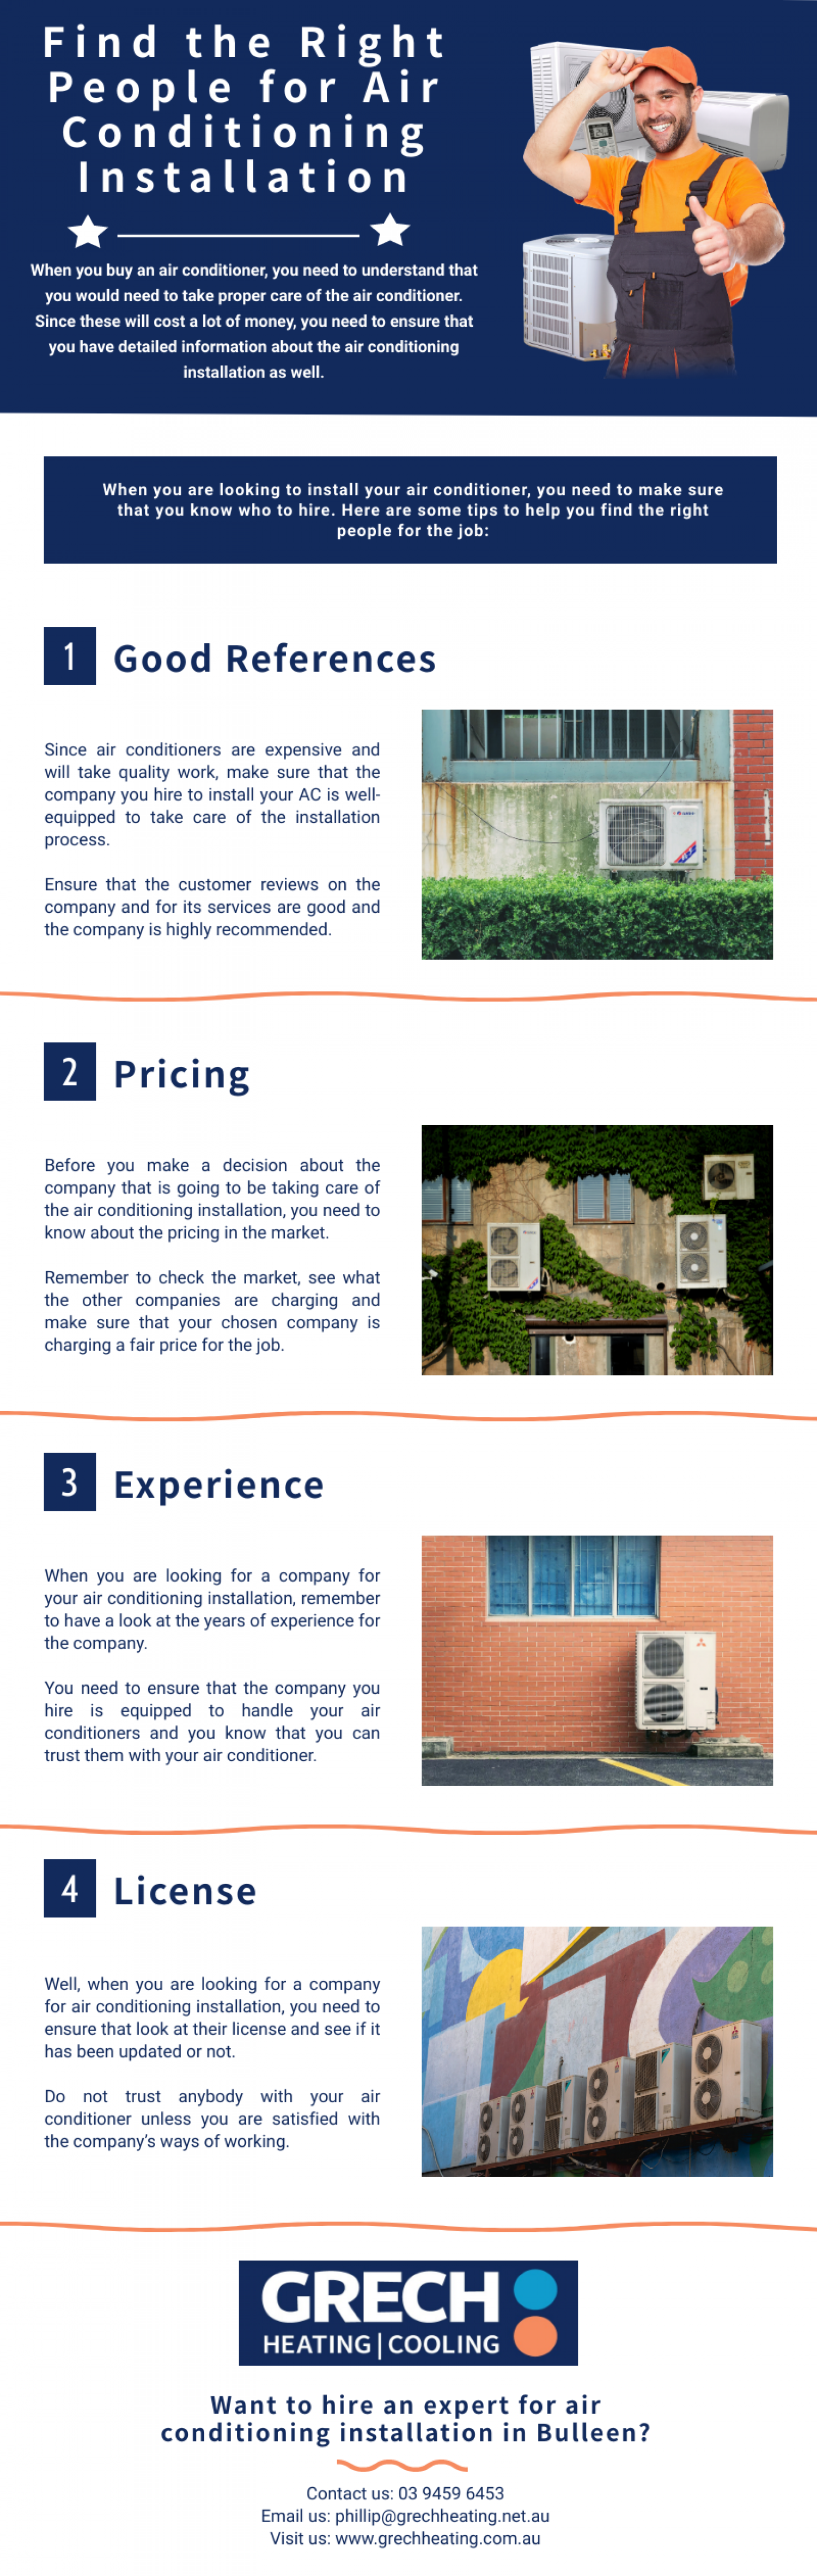 Find the Right People for Air Conditioning Installation Infographic